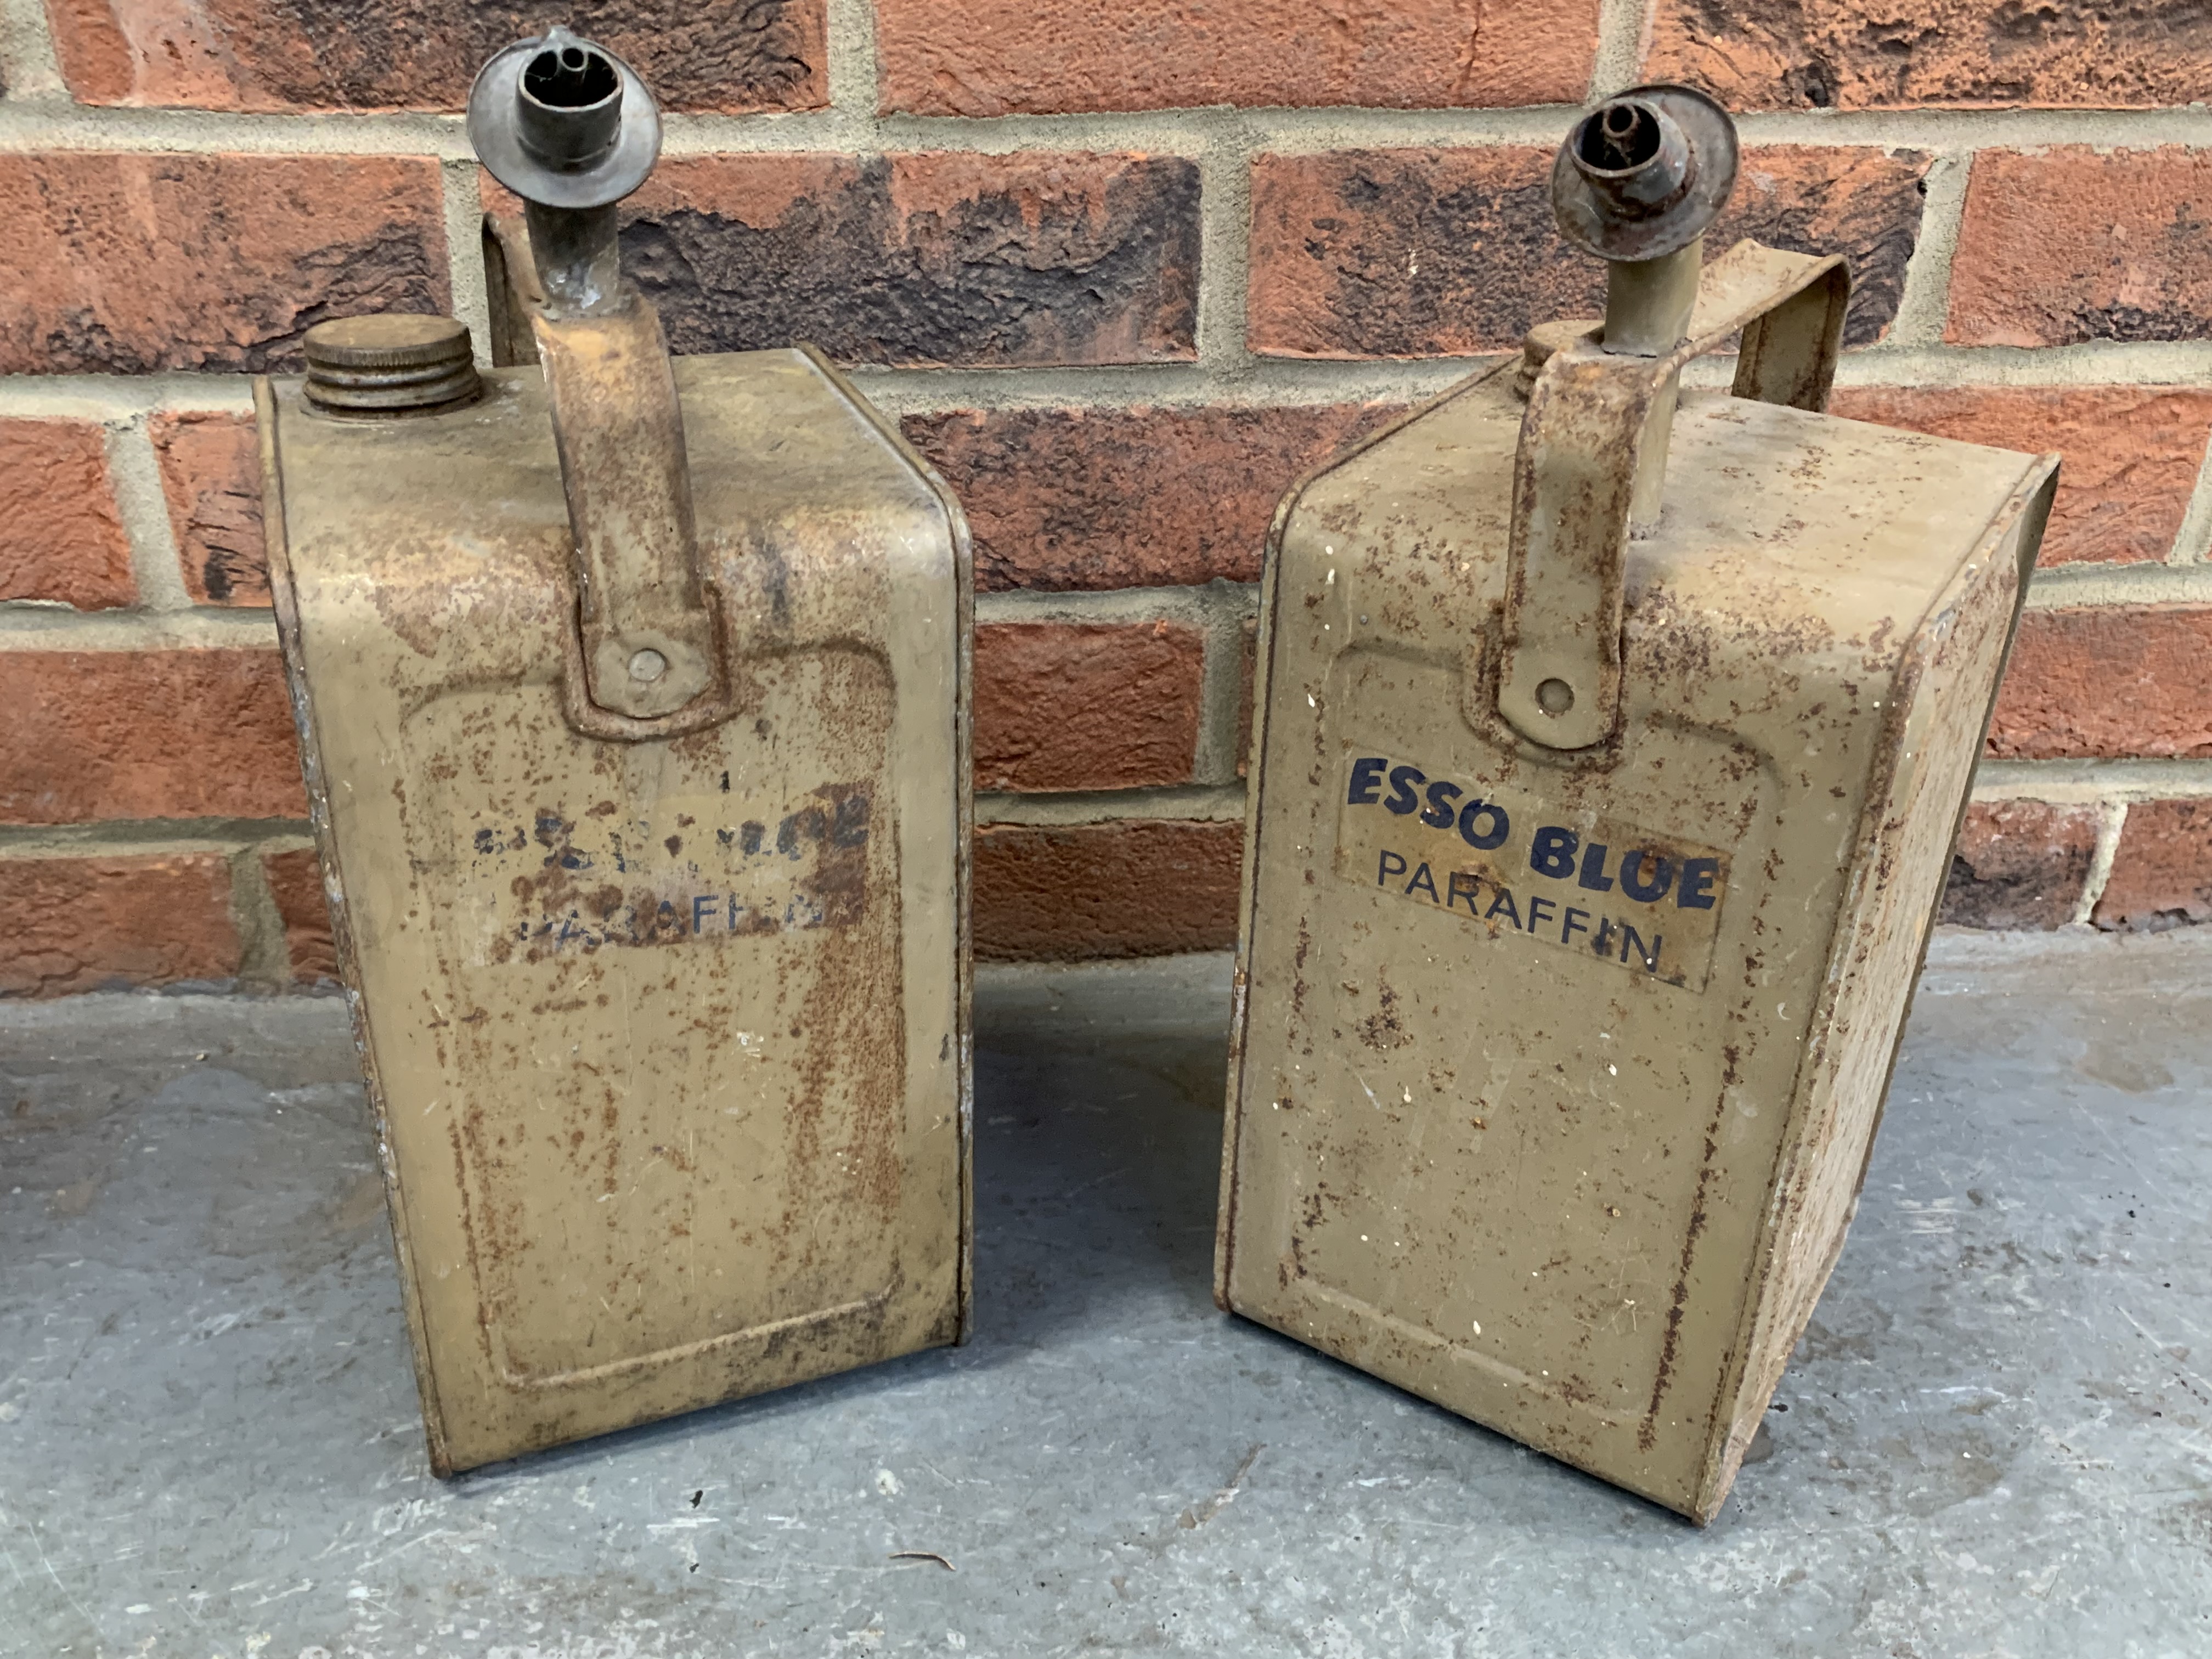 Vintage Oil Can, Two Esso Blue Paraffin Cans & a Blow Torch - Image 2 of 3